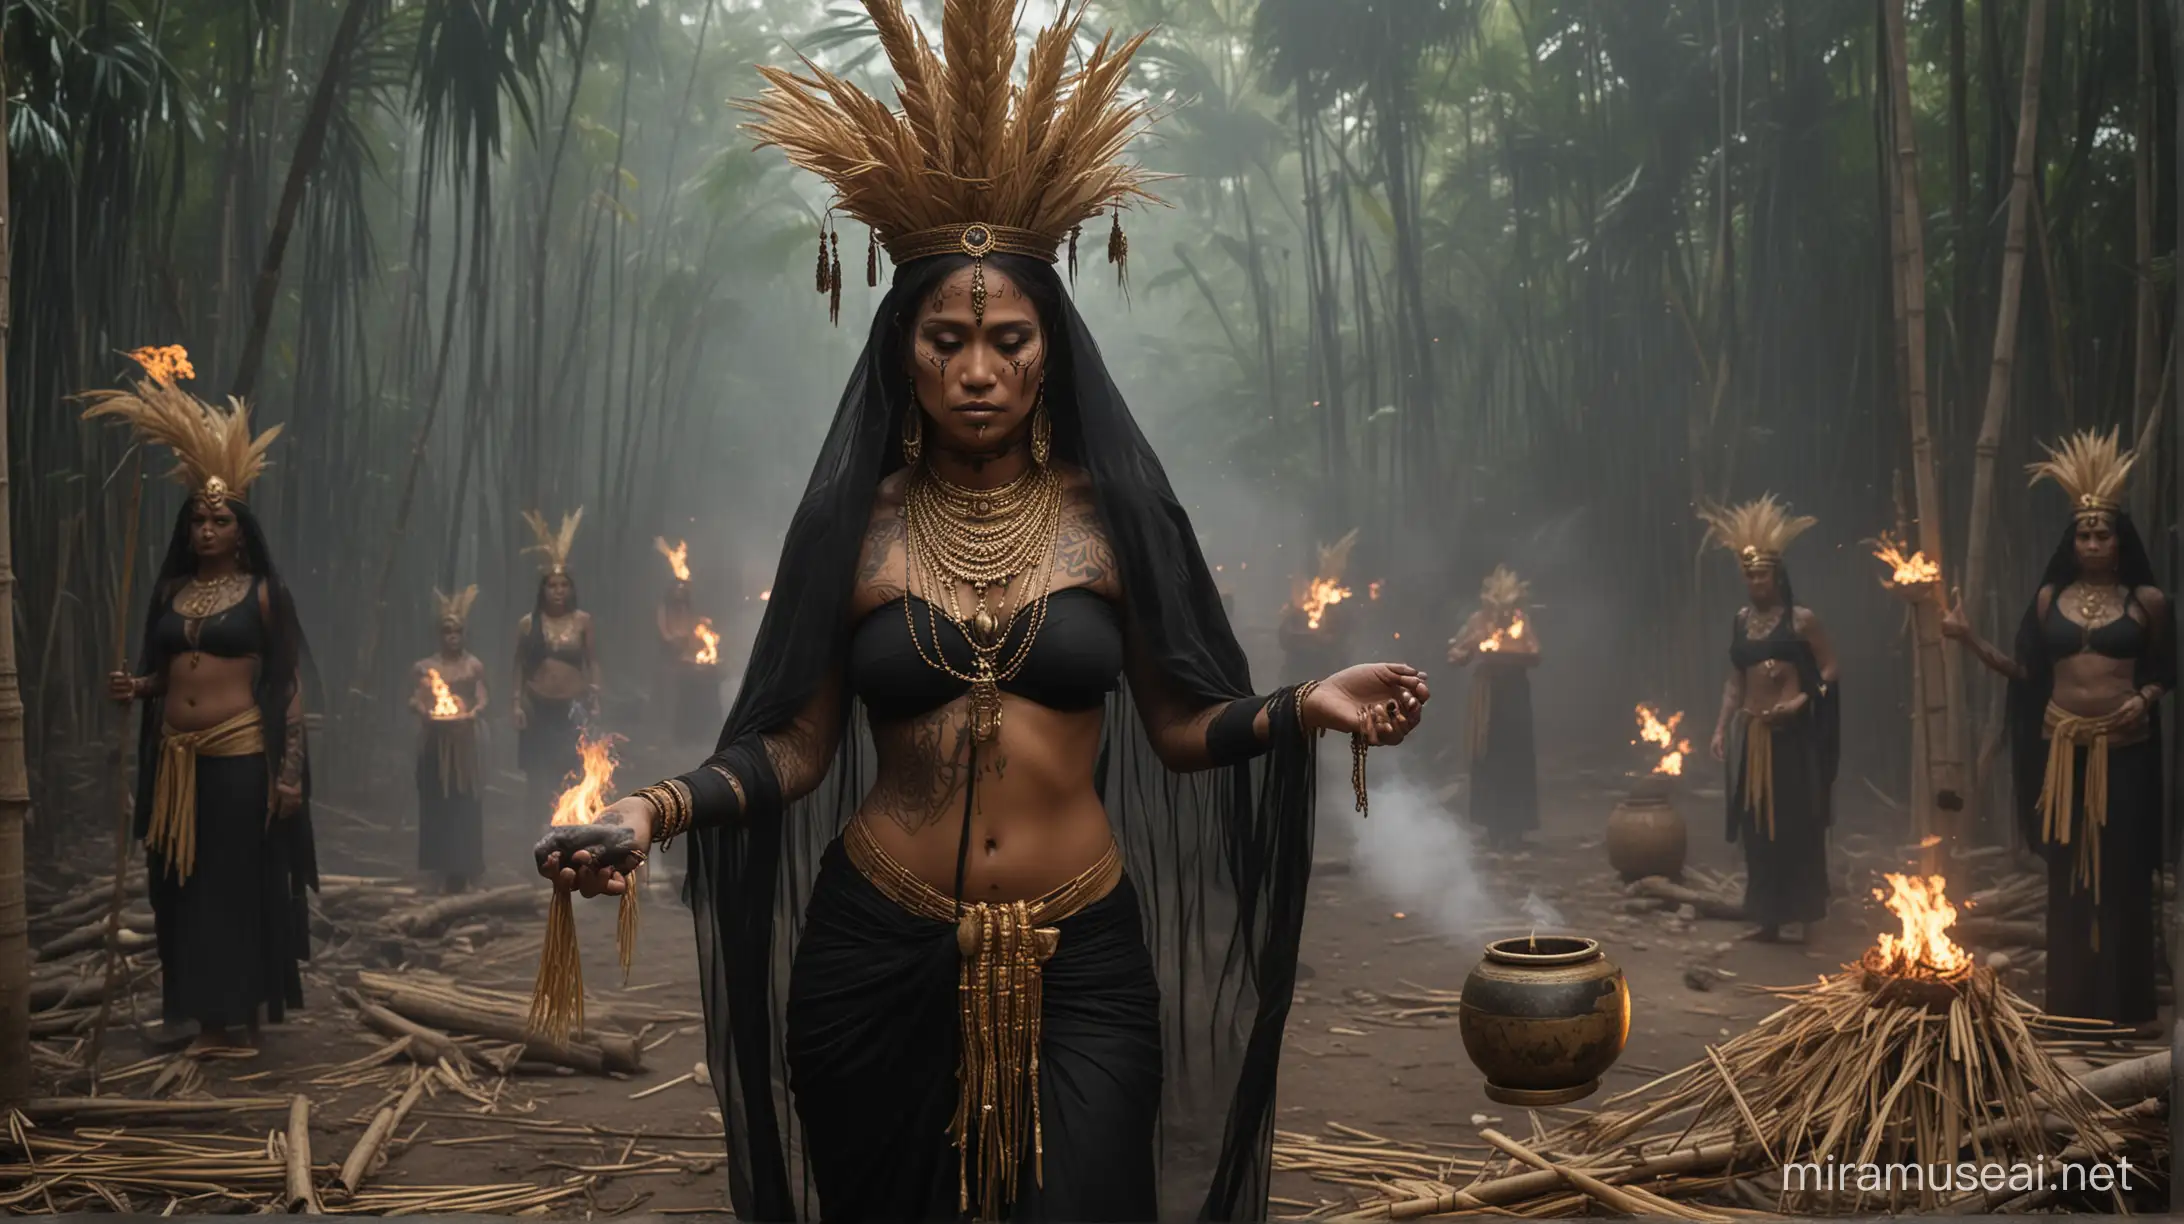 A precolonial Filipino shamanic priestess with dark tattooed skin, she wears ethnic gold jewelry, she carries a clay jar full of smoke, her eyes are white as if possessed, and she is covered in a sheer black veil, she is surrounded by dancing priestesses carrying bundled straw hays, they are performing a ritual in front of a makeshift bamboo altar with woven palm leaves and torches, night scene, cinematic